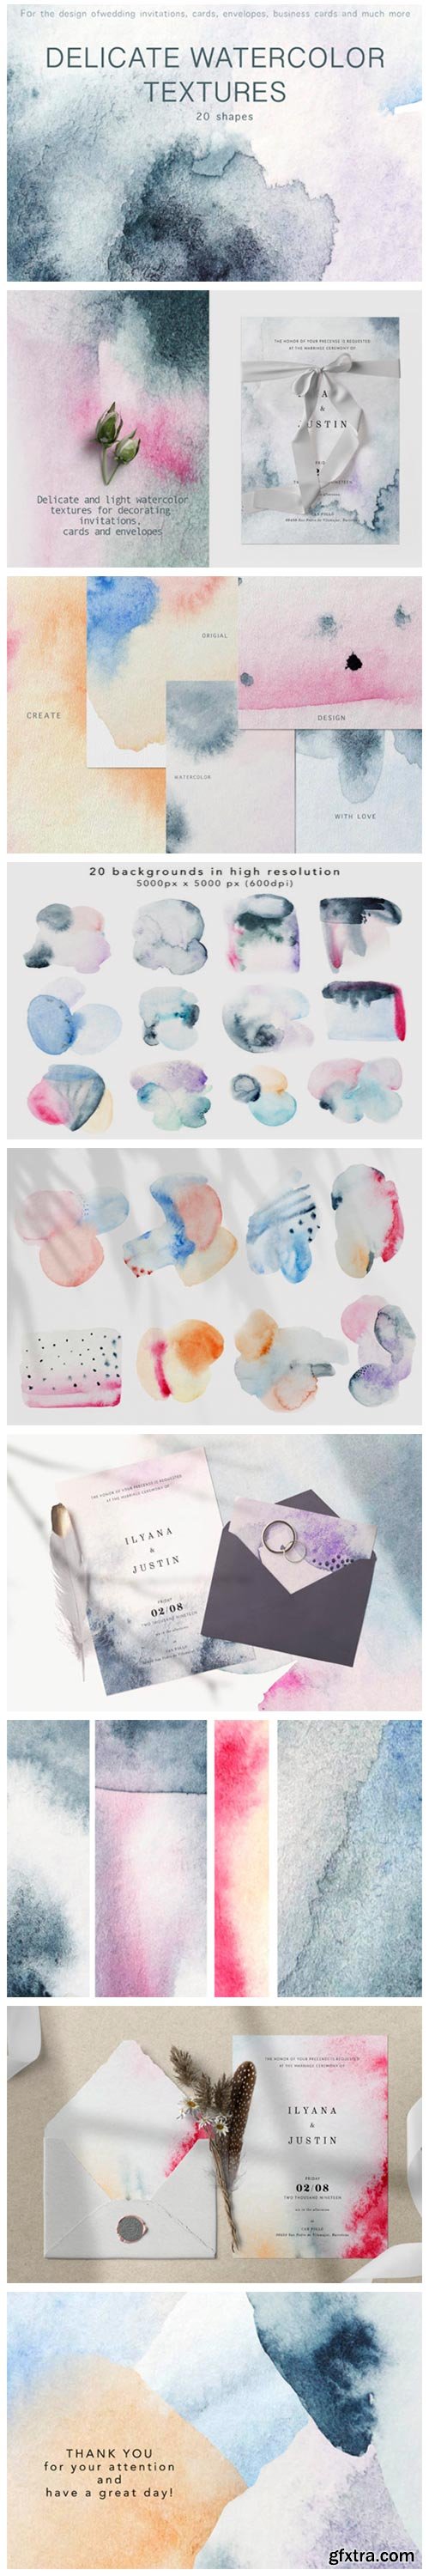 Watercolor Textures for Invitations 4442076